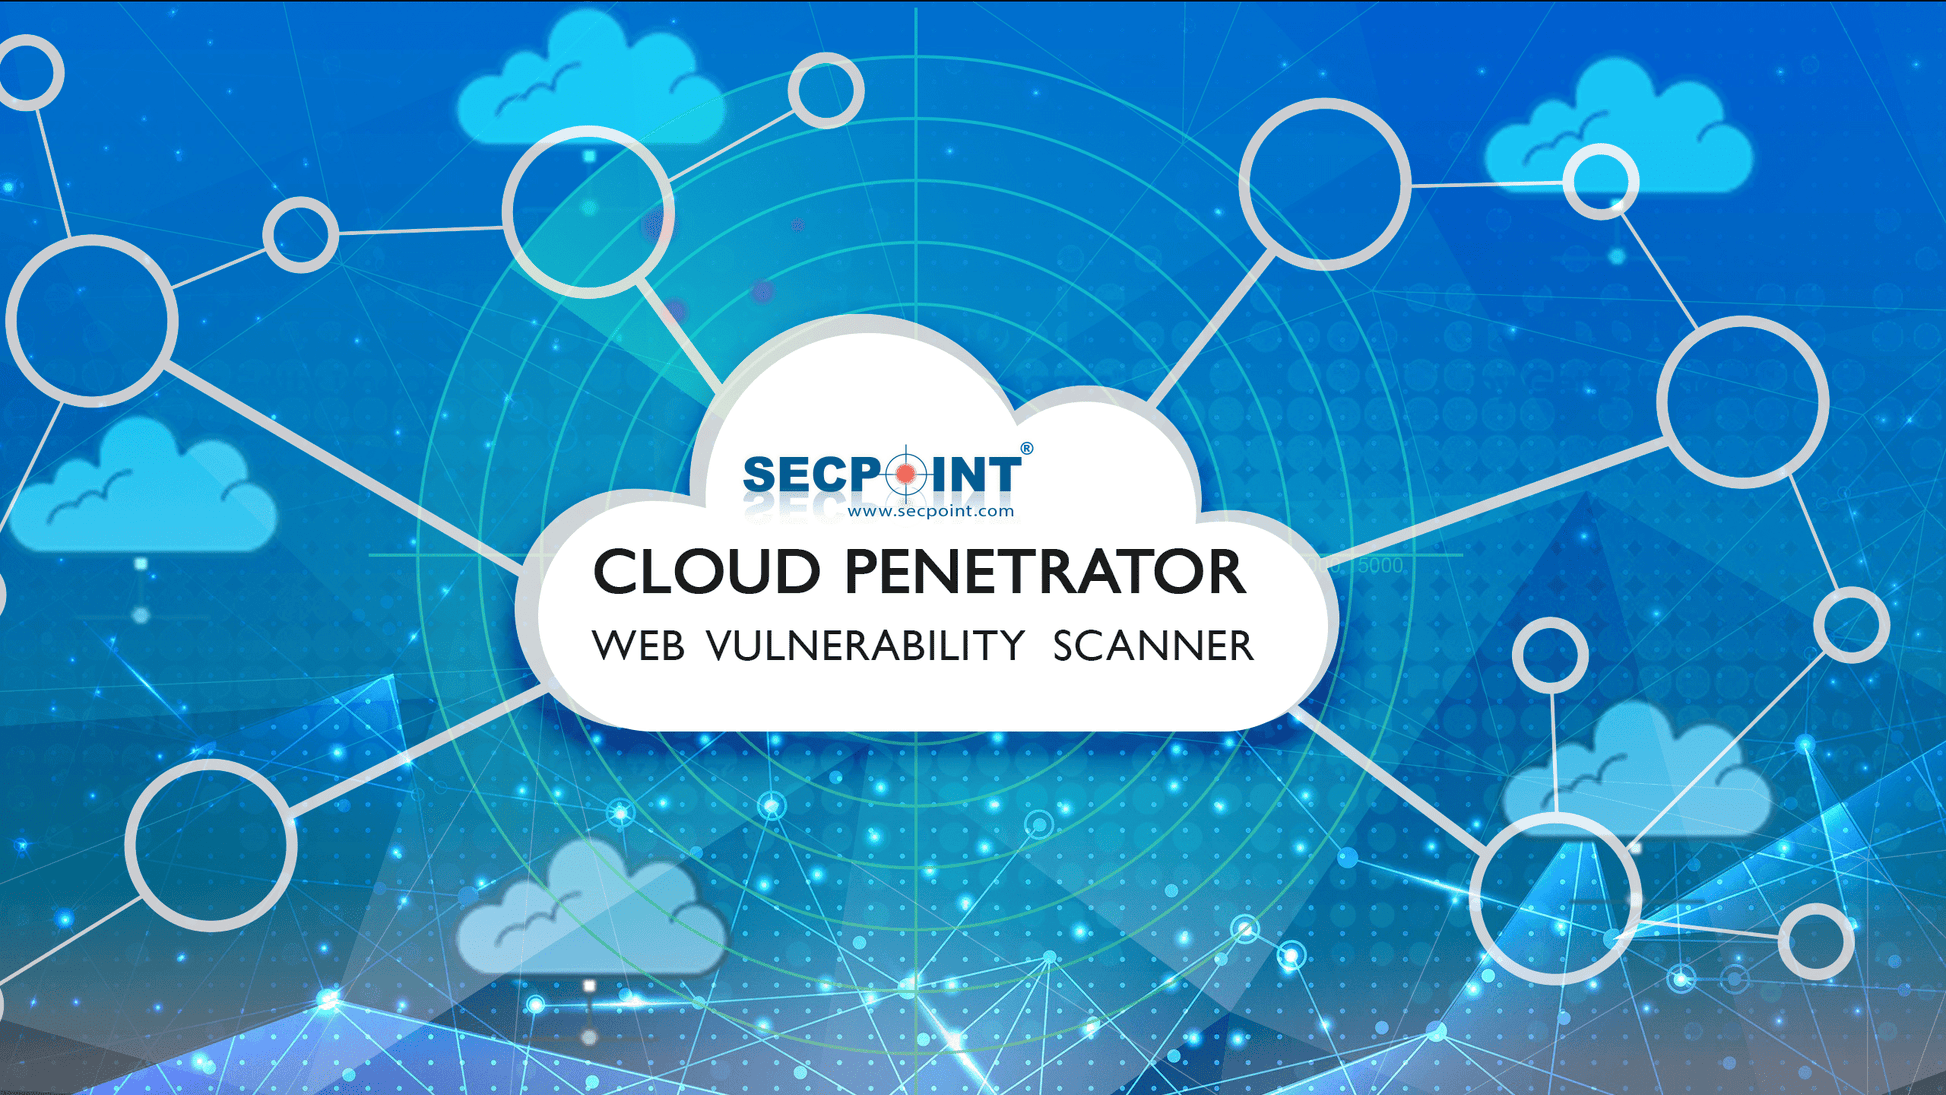 SecPoint Cloud Penetrator S9 - Vulnerability Scanning of 64 IPs for 1 Year Static Scan License - SecPoint